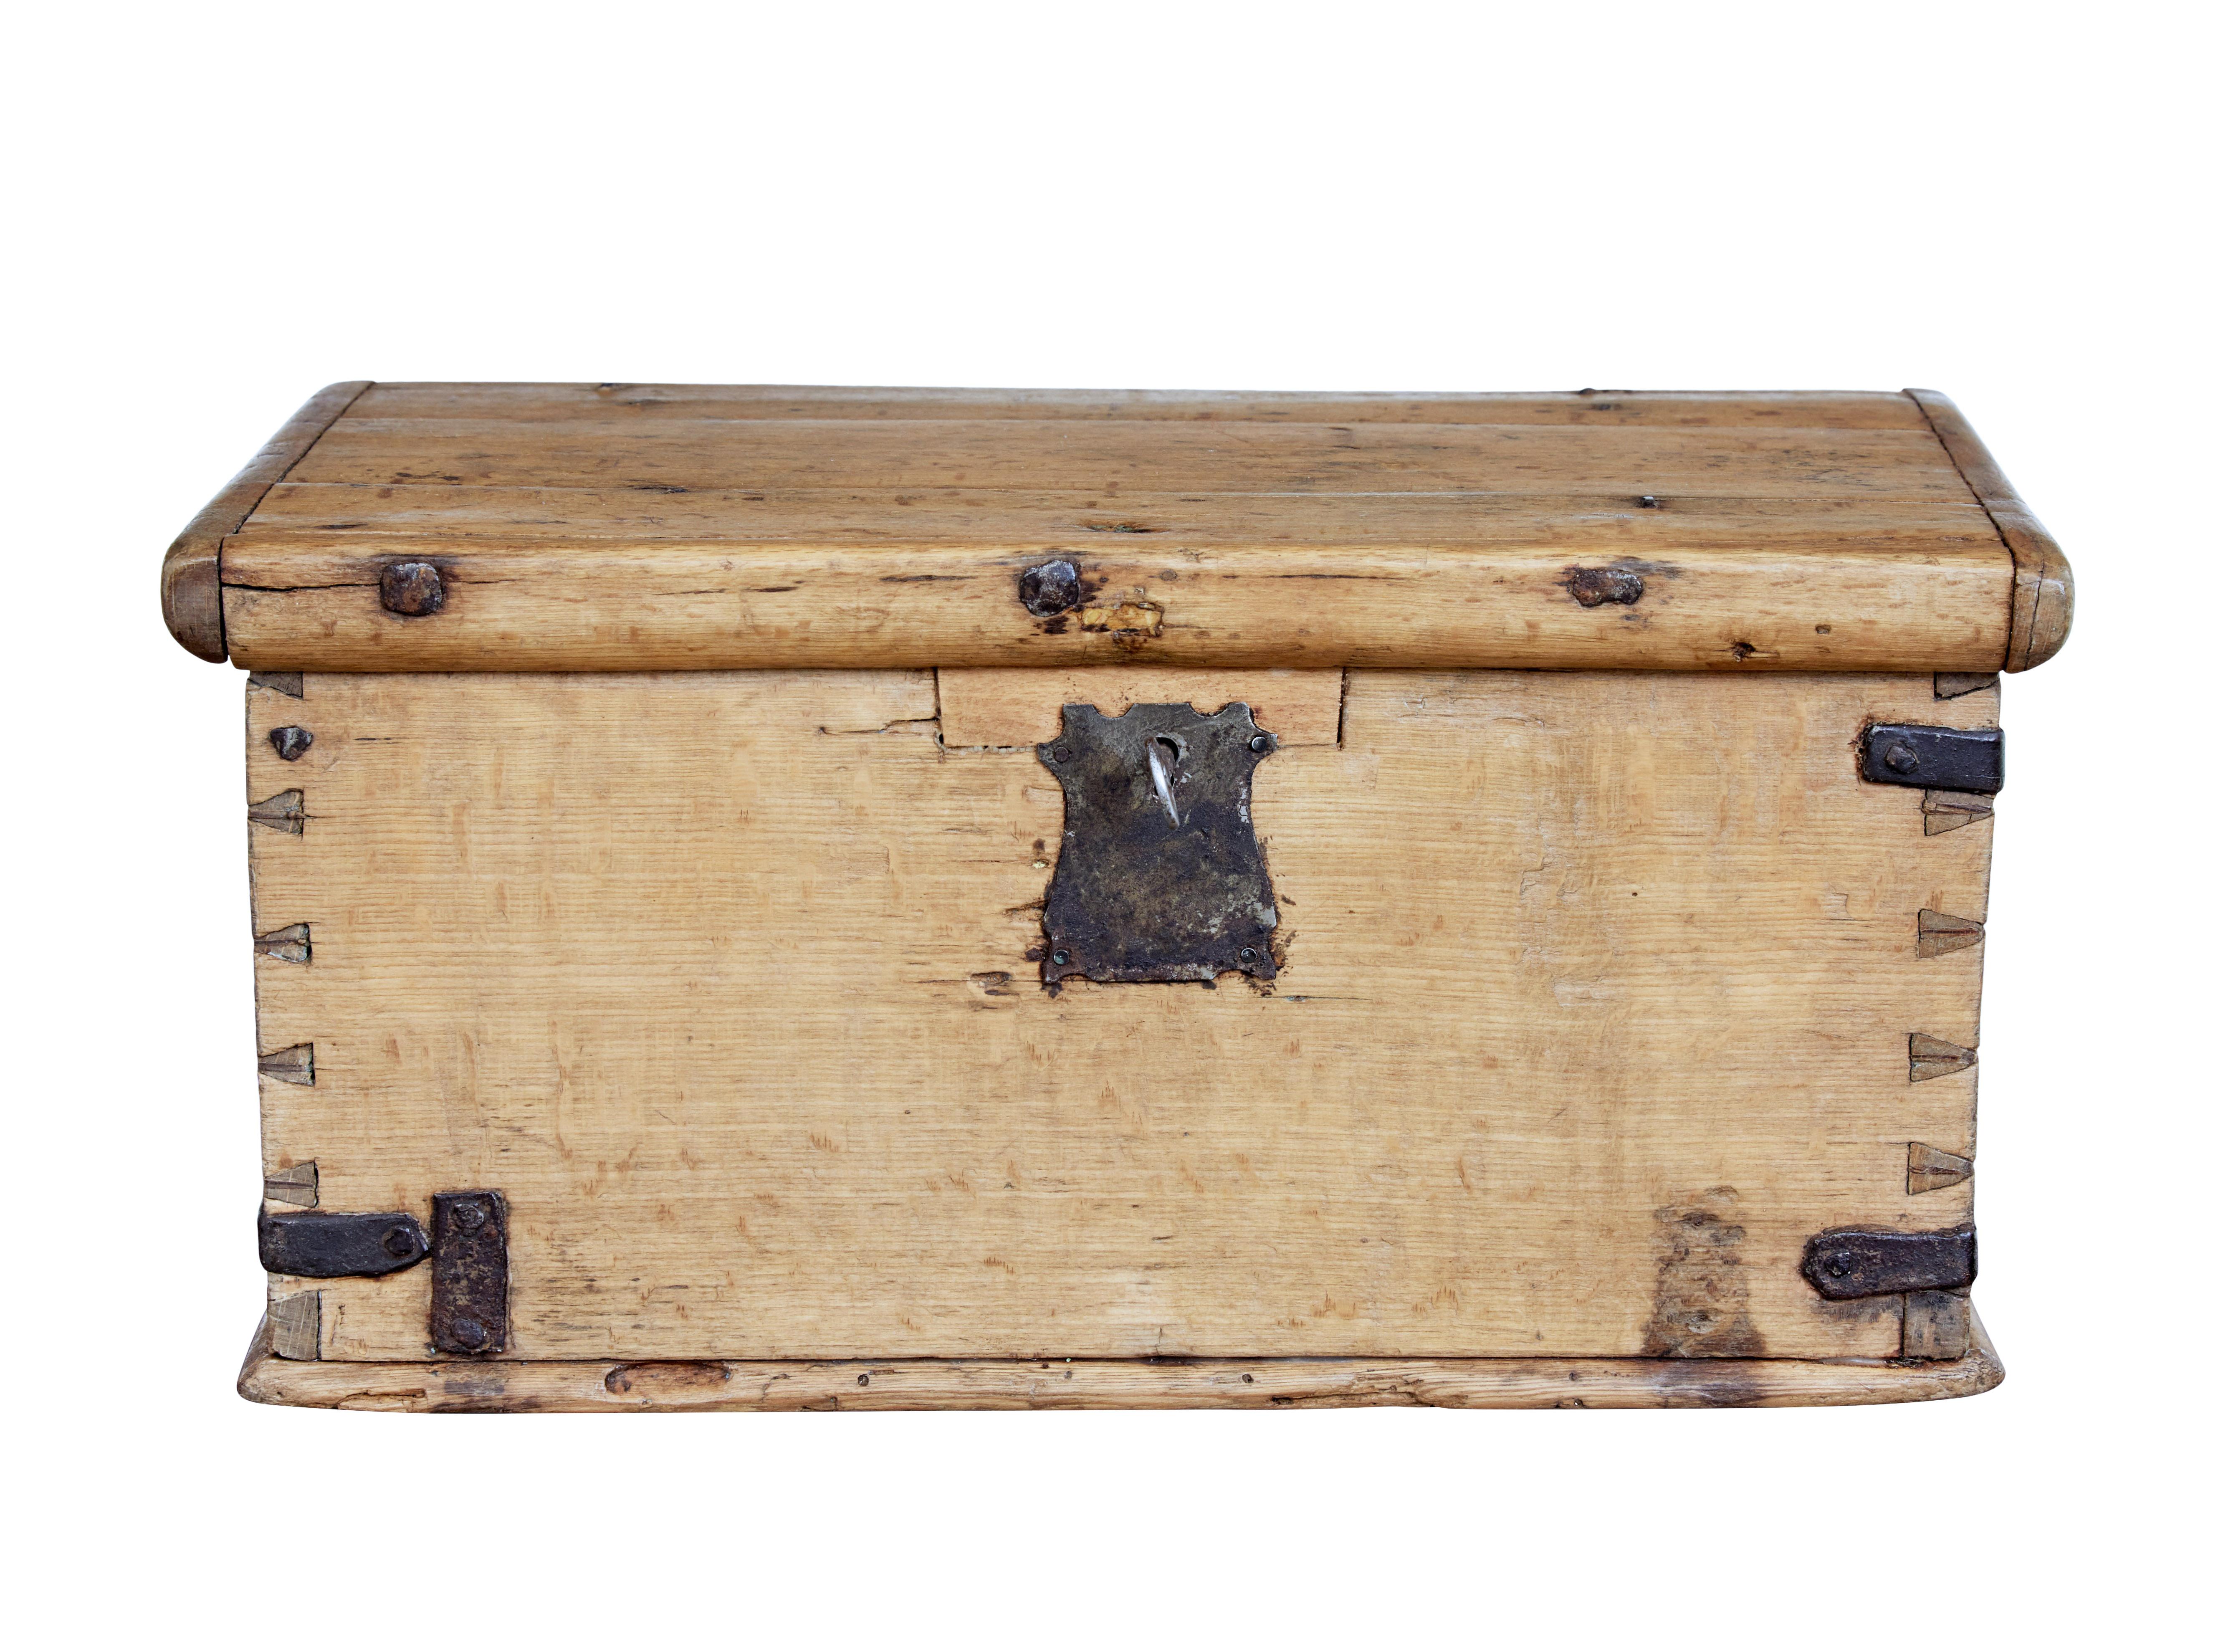 Mid-19th century Swedish oak and pine decorative box, circa 1860.

Good quality Scandinavian strong box made from oak and pine, complete with original strap work, hinges and working lock and key.

Single compartment to the interior.

Expected